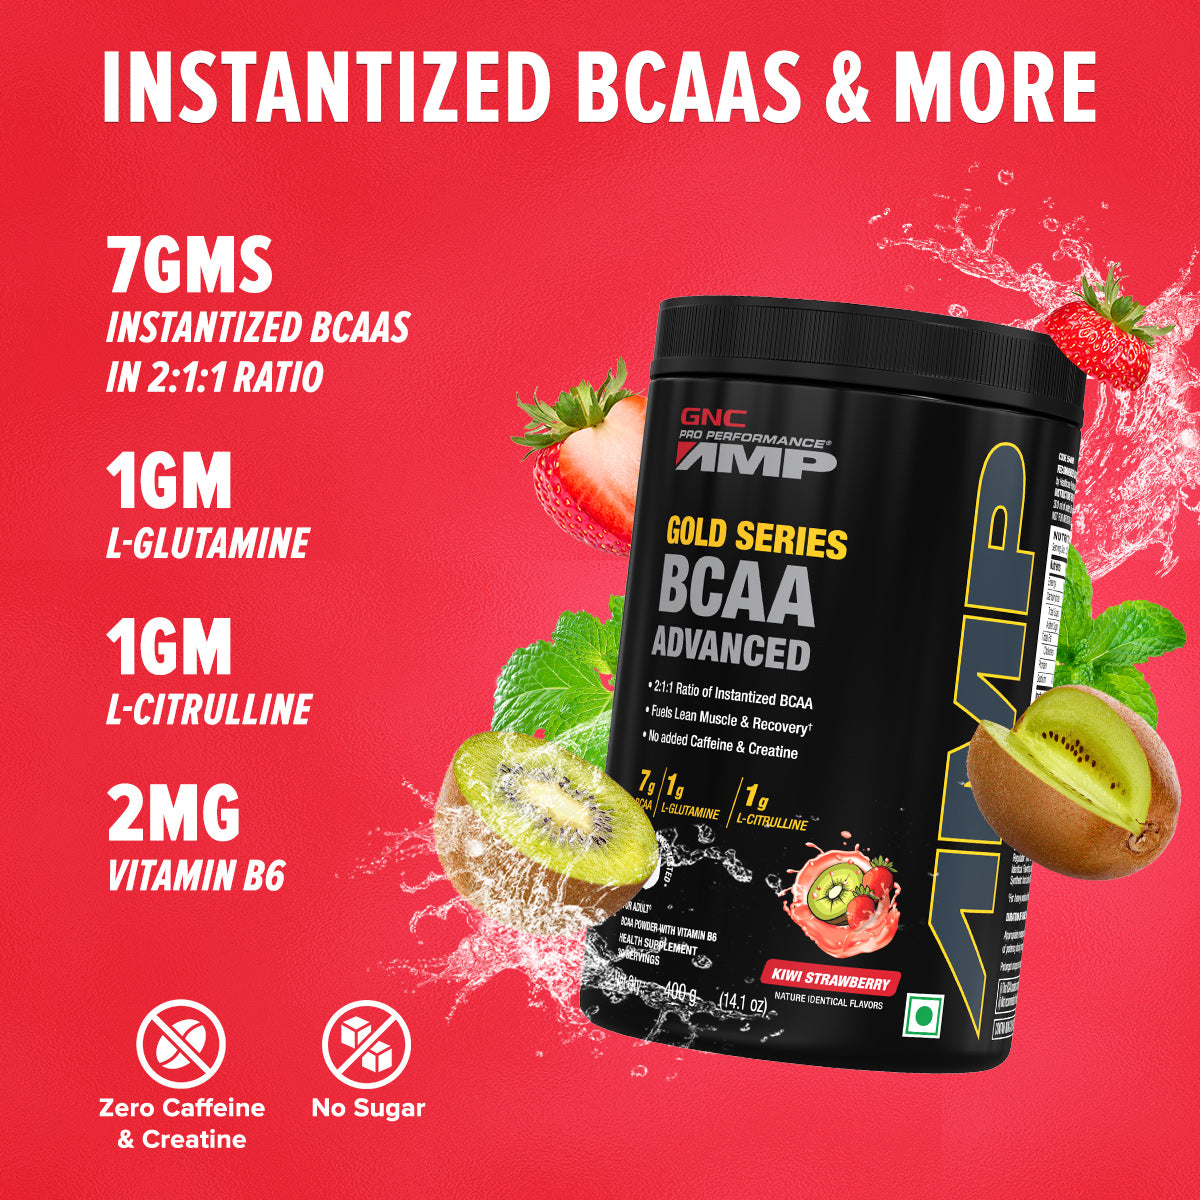 GNC AMP Gold Series BCAA Advanced - Clearance Sale - Fuels Lean Muscle Strength & Recovery | Informed Choice Certified | 400g | 30 Servings